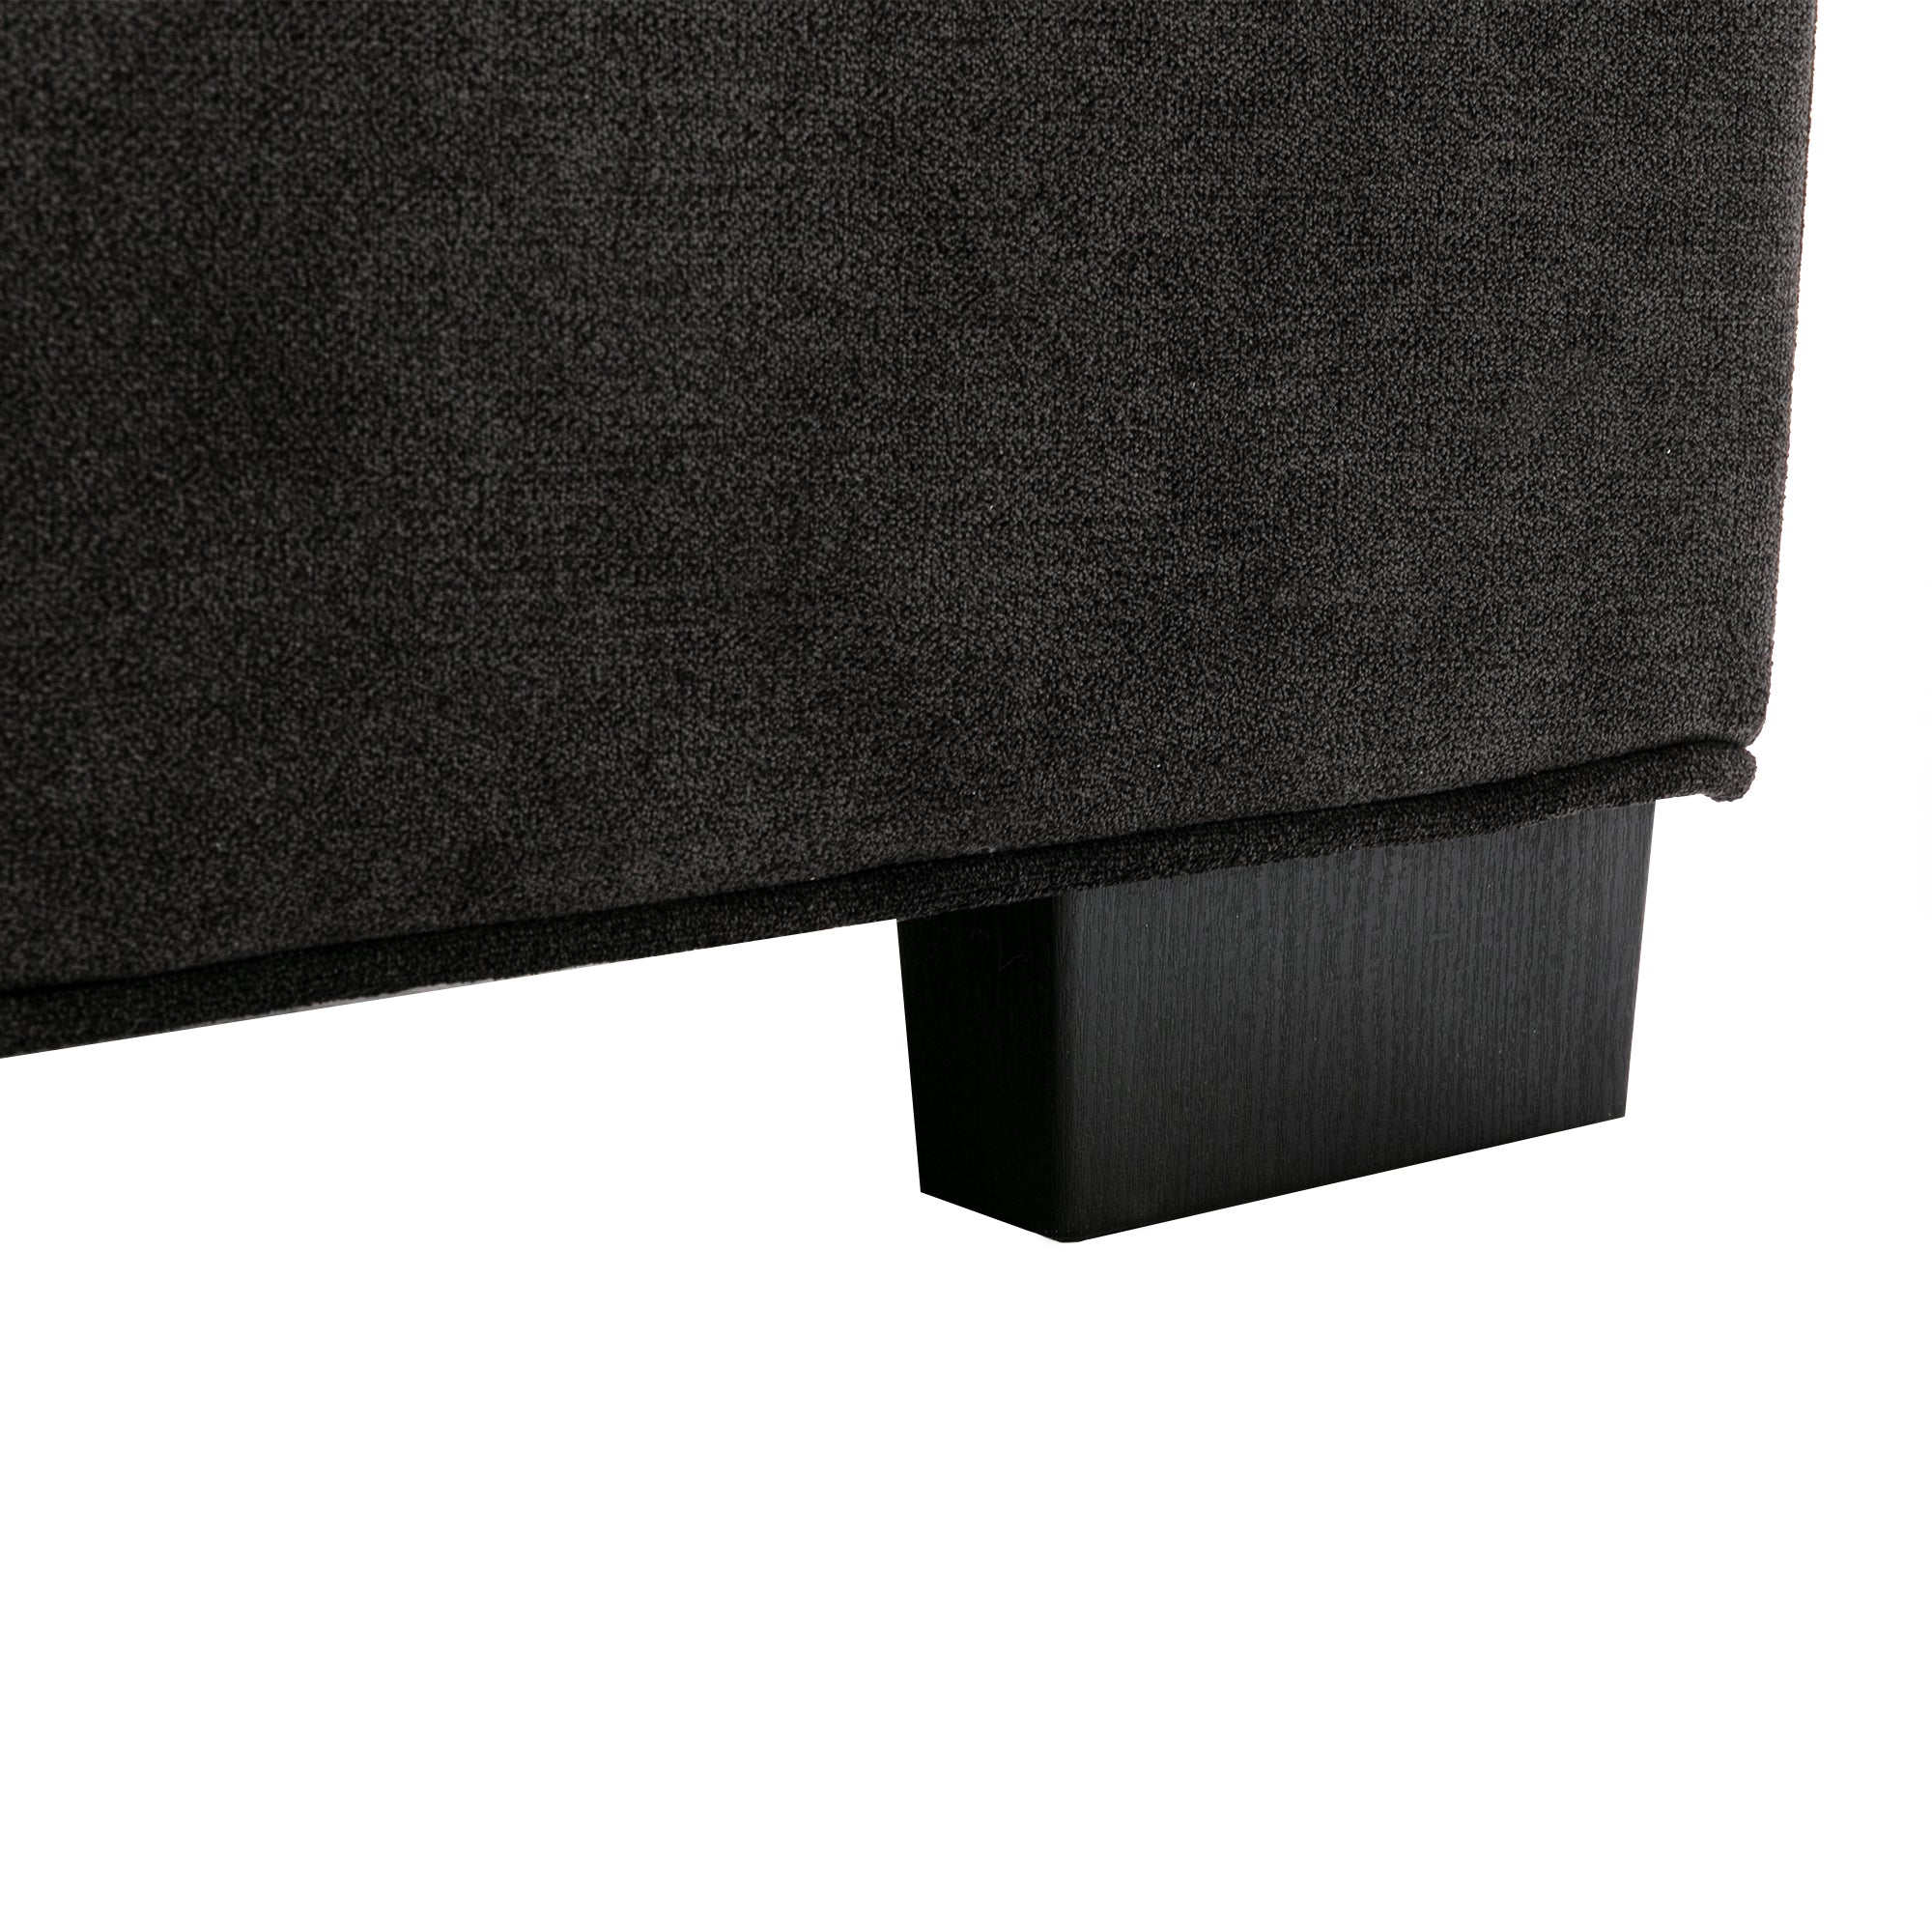 COOMORE LIVING ROOM OTTOMAN LAZY CHAIR black-polyester